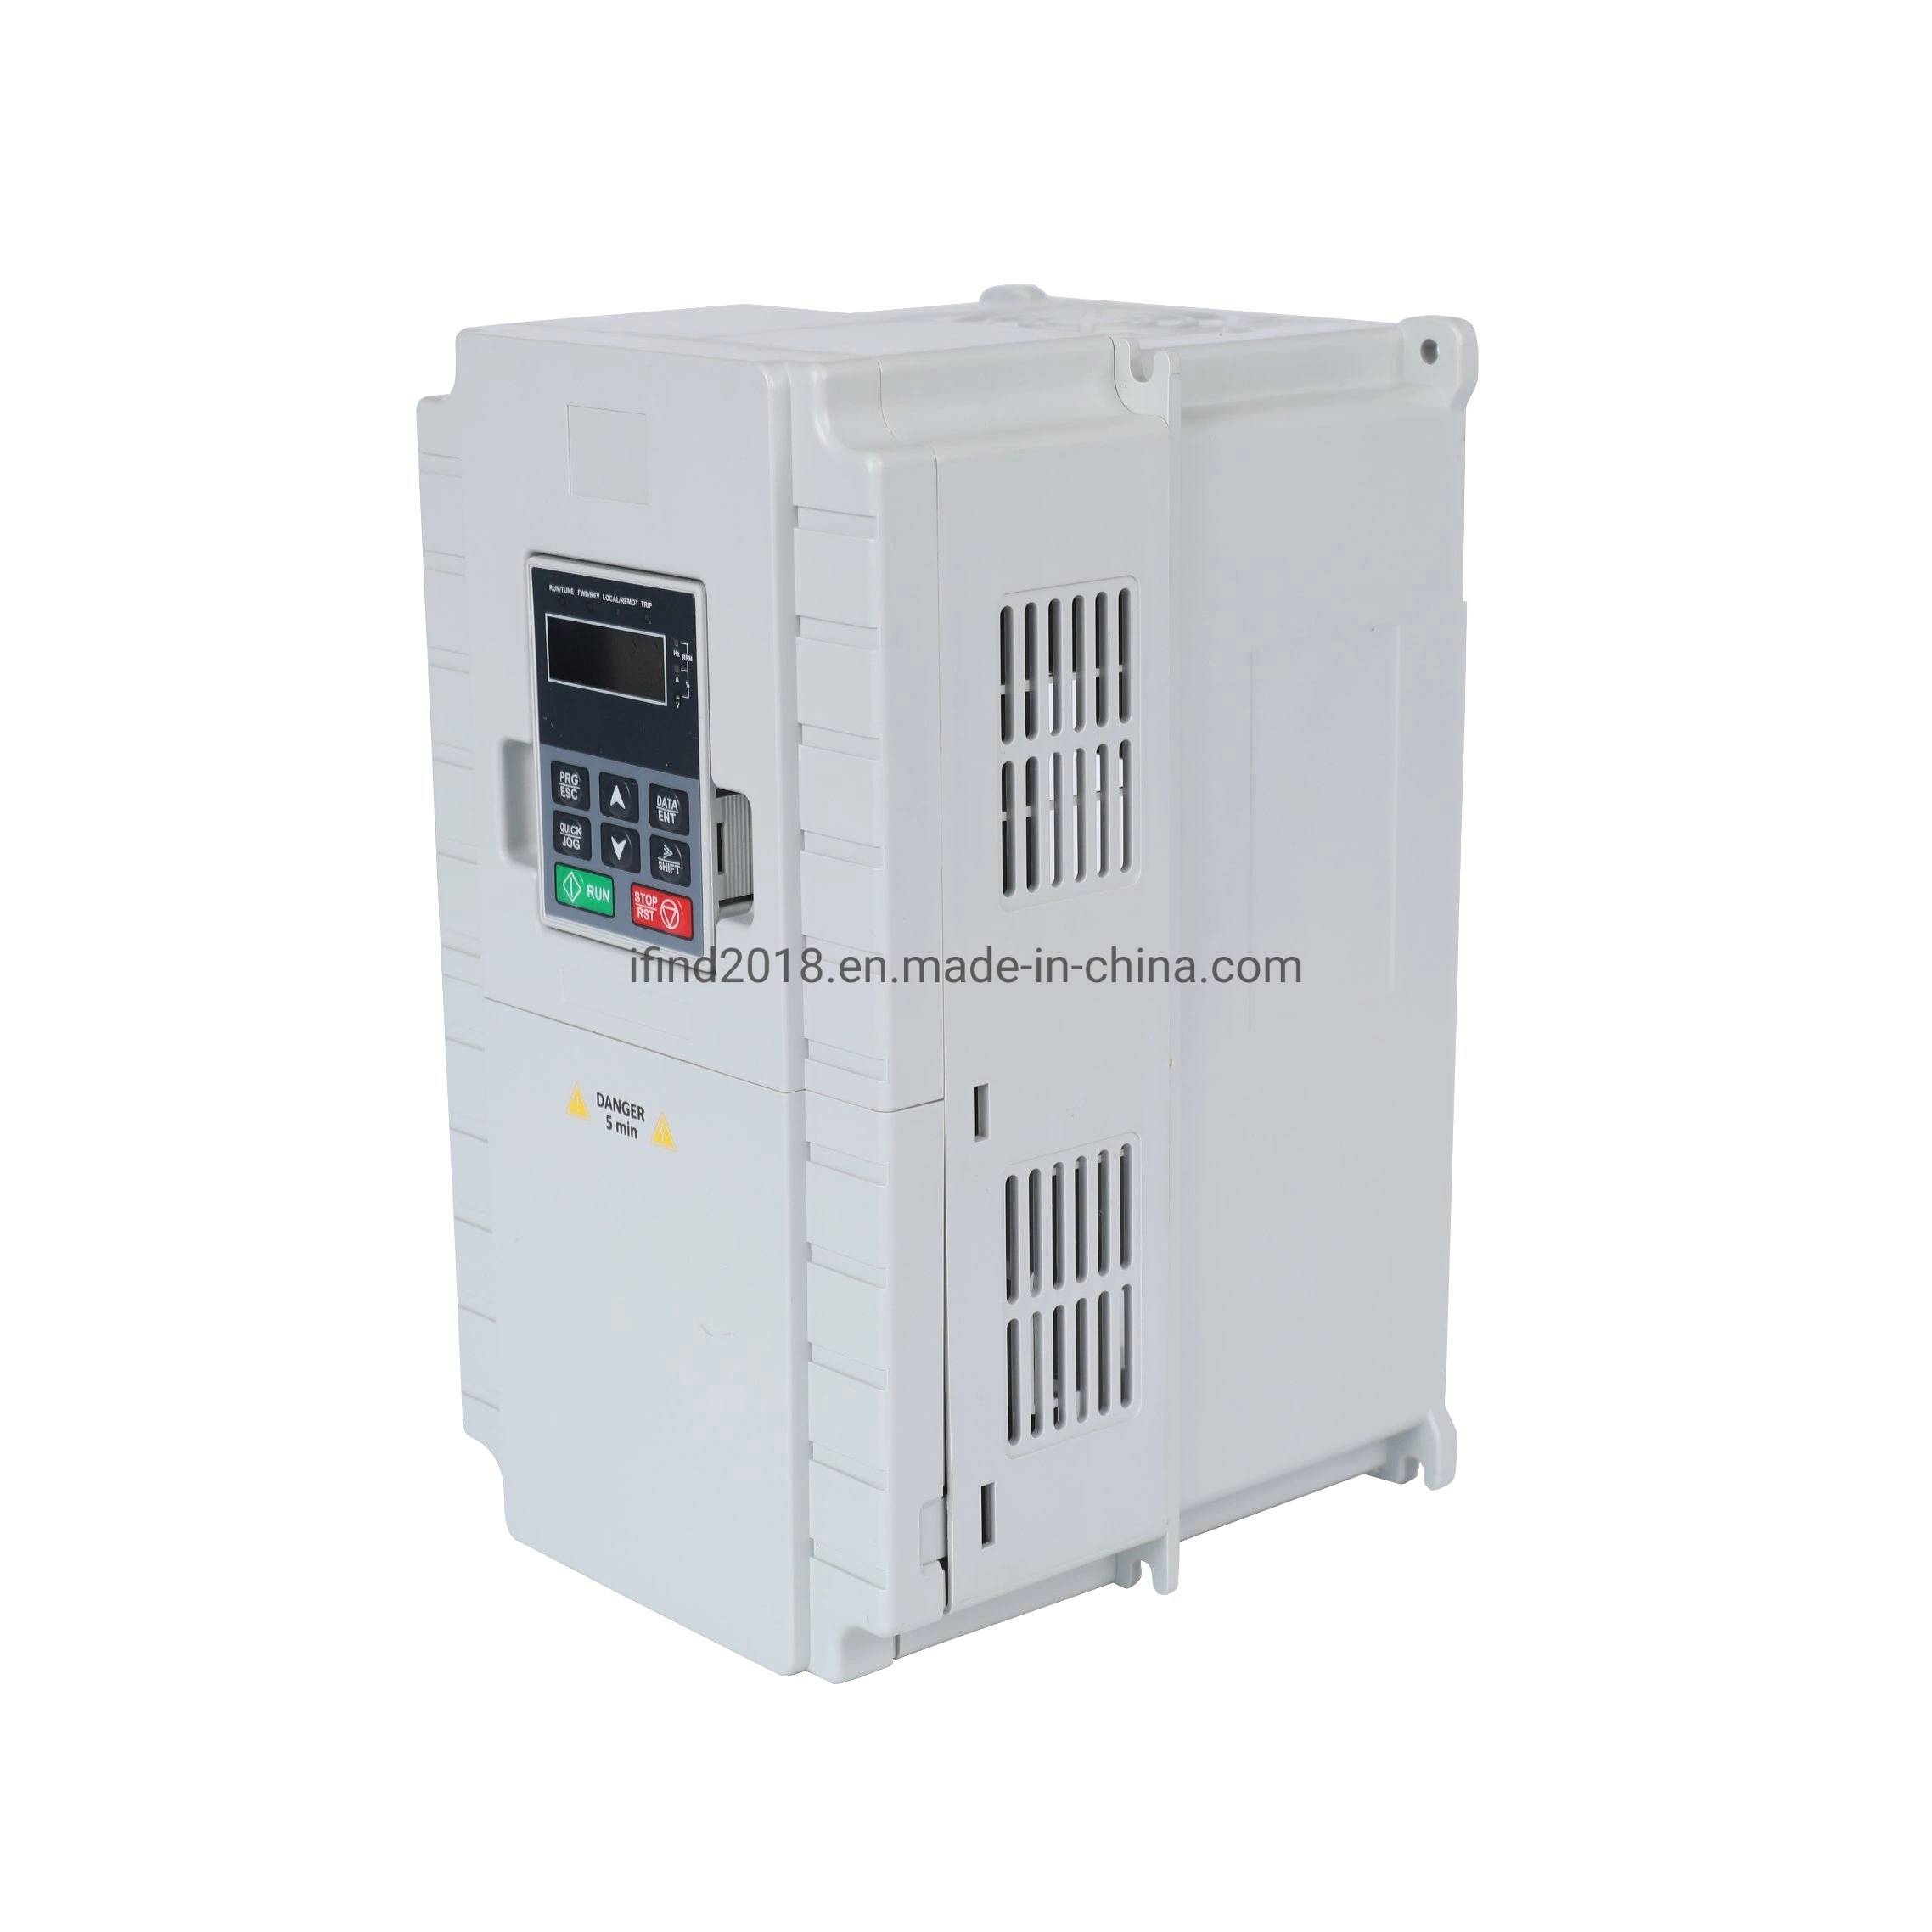 V/F Control VFD Speed Controller Inversor Onduleur Frequency Inverter Variable Frequency Drive